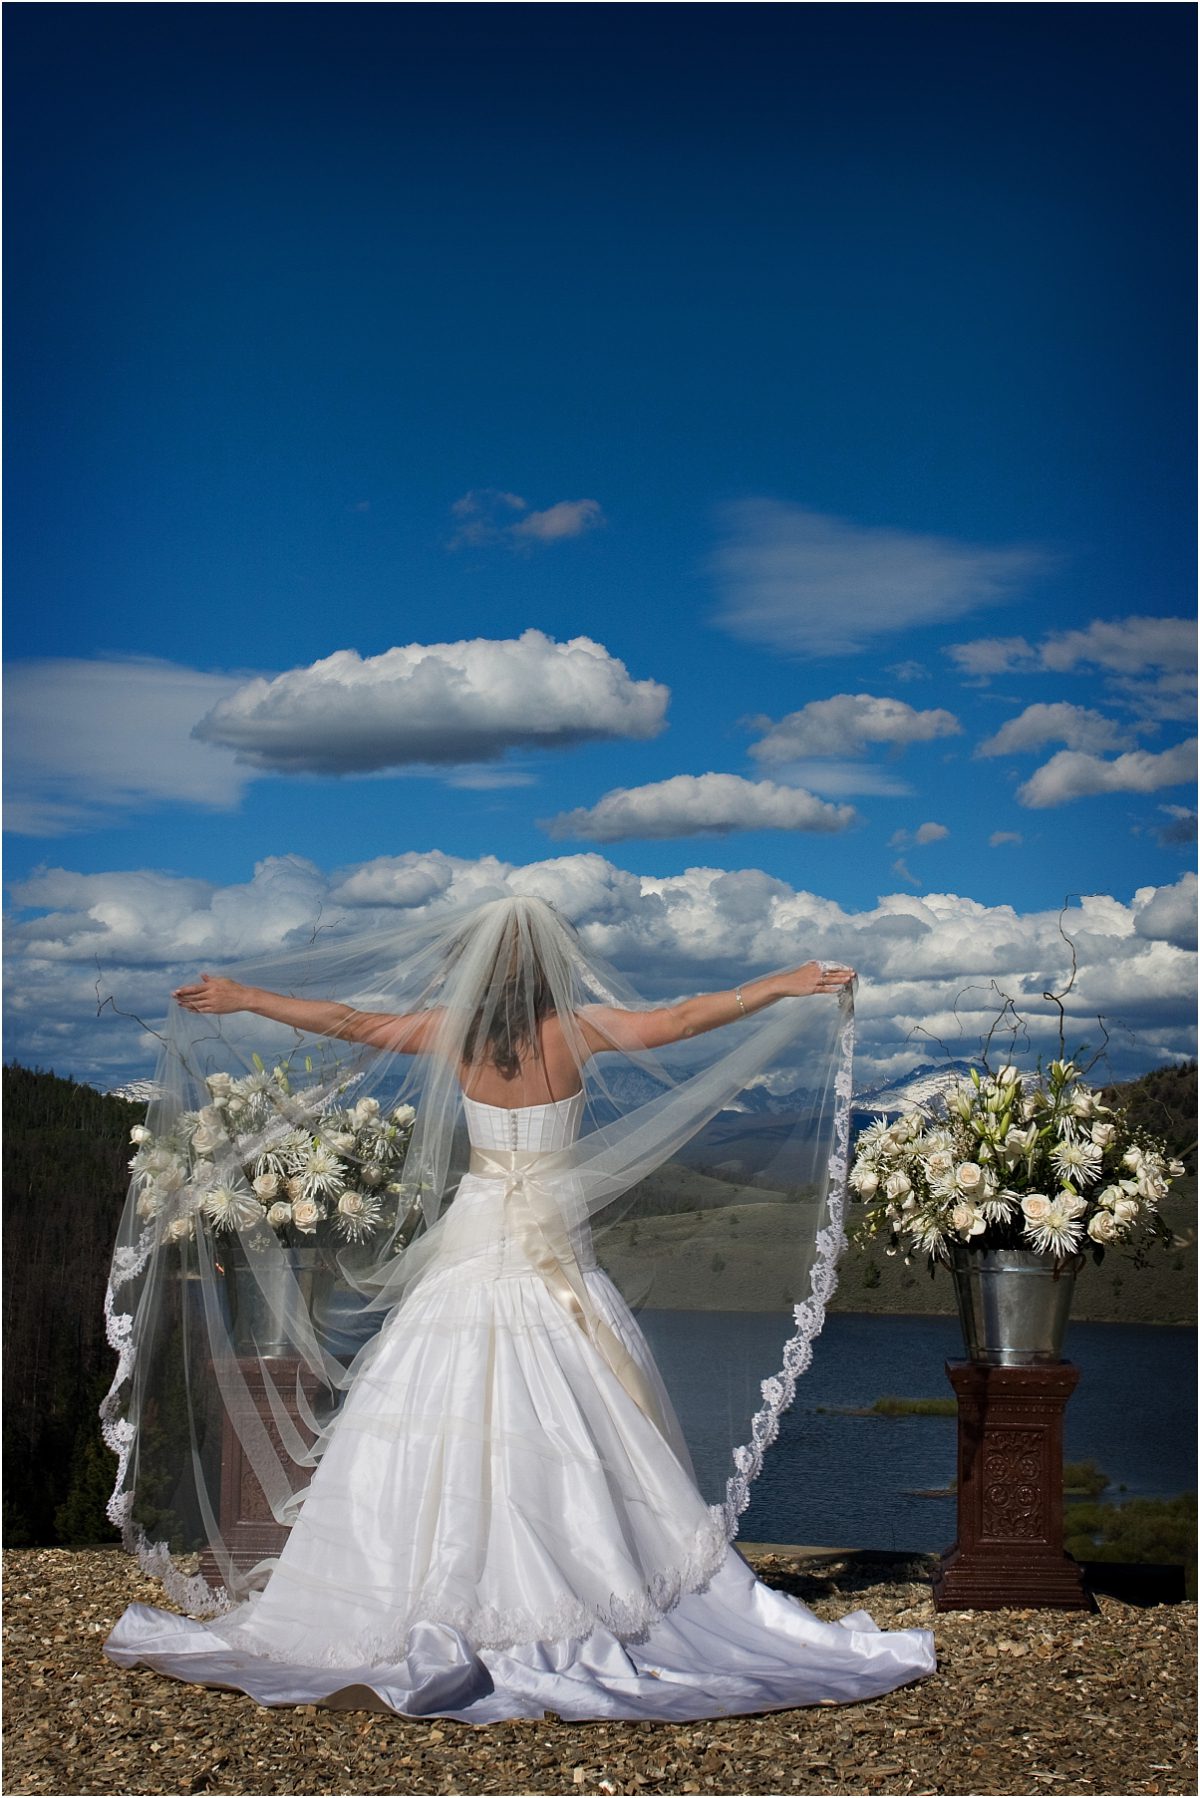 bridal portrait, bride at ceremony altar overlooking mountain lake, puffy white clouds and blue sky, holding out the veil,C Lazy U Ranch, Granby, Colorado Wedding Photography, Mountain Wedding Photographer, bride alone on wedding day